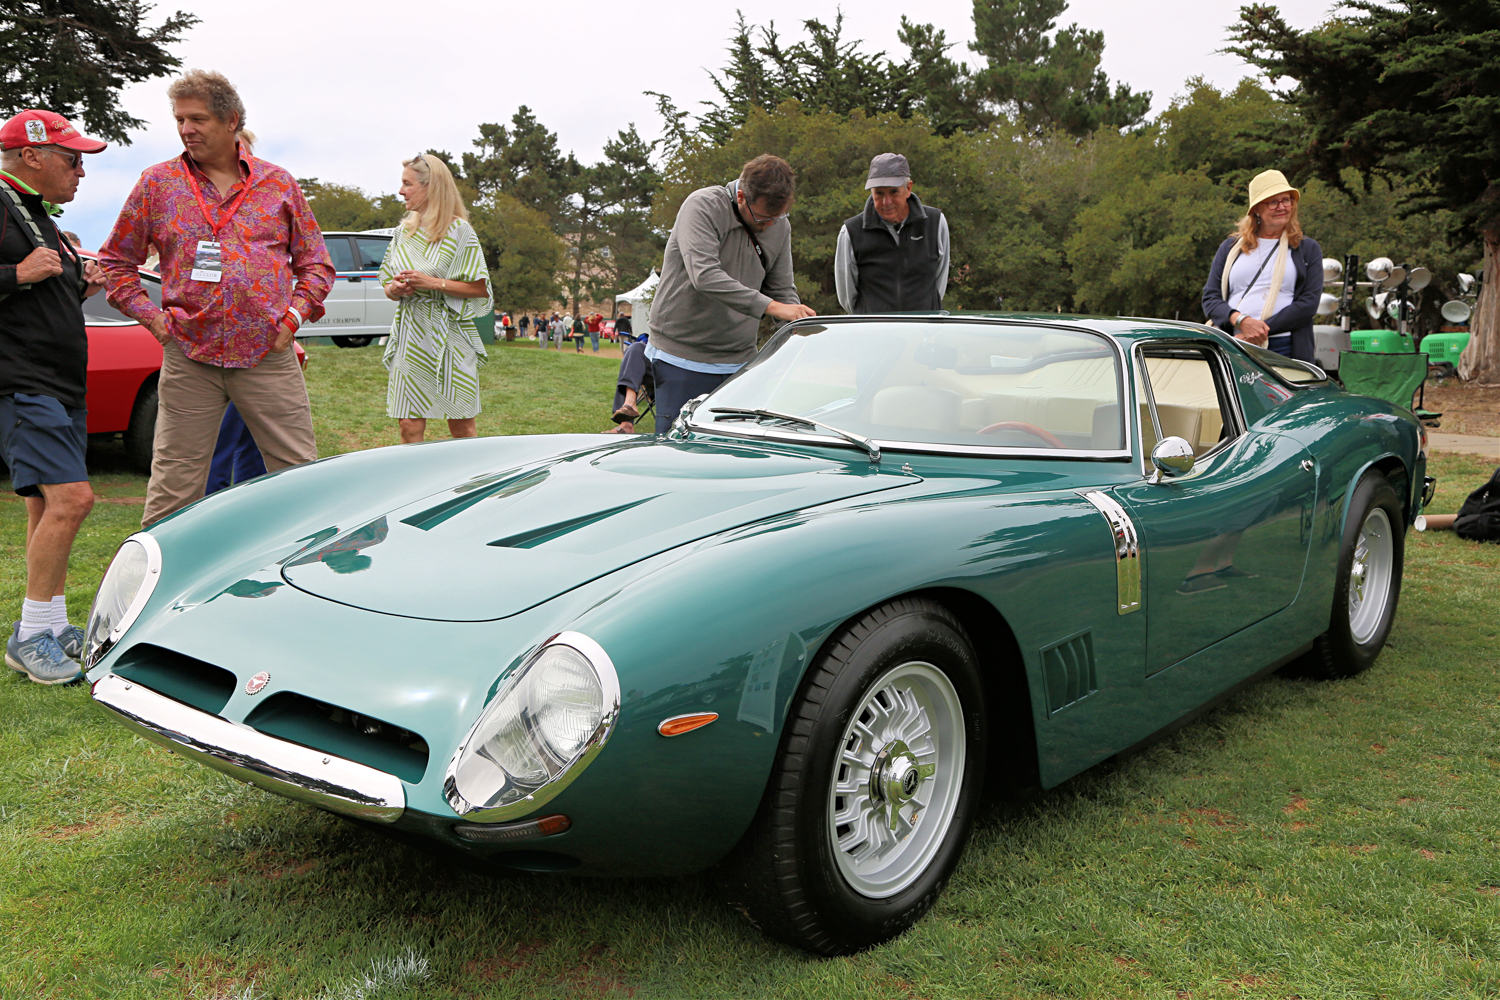 1967 Bizzarrini 5300 Strada owned by Billy & Isa Hibbs of Tyler, Texas. Best of Show